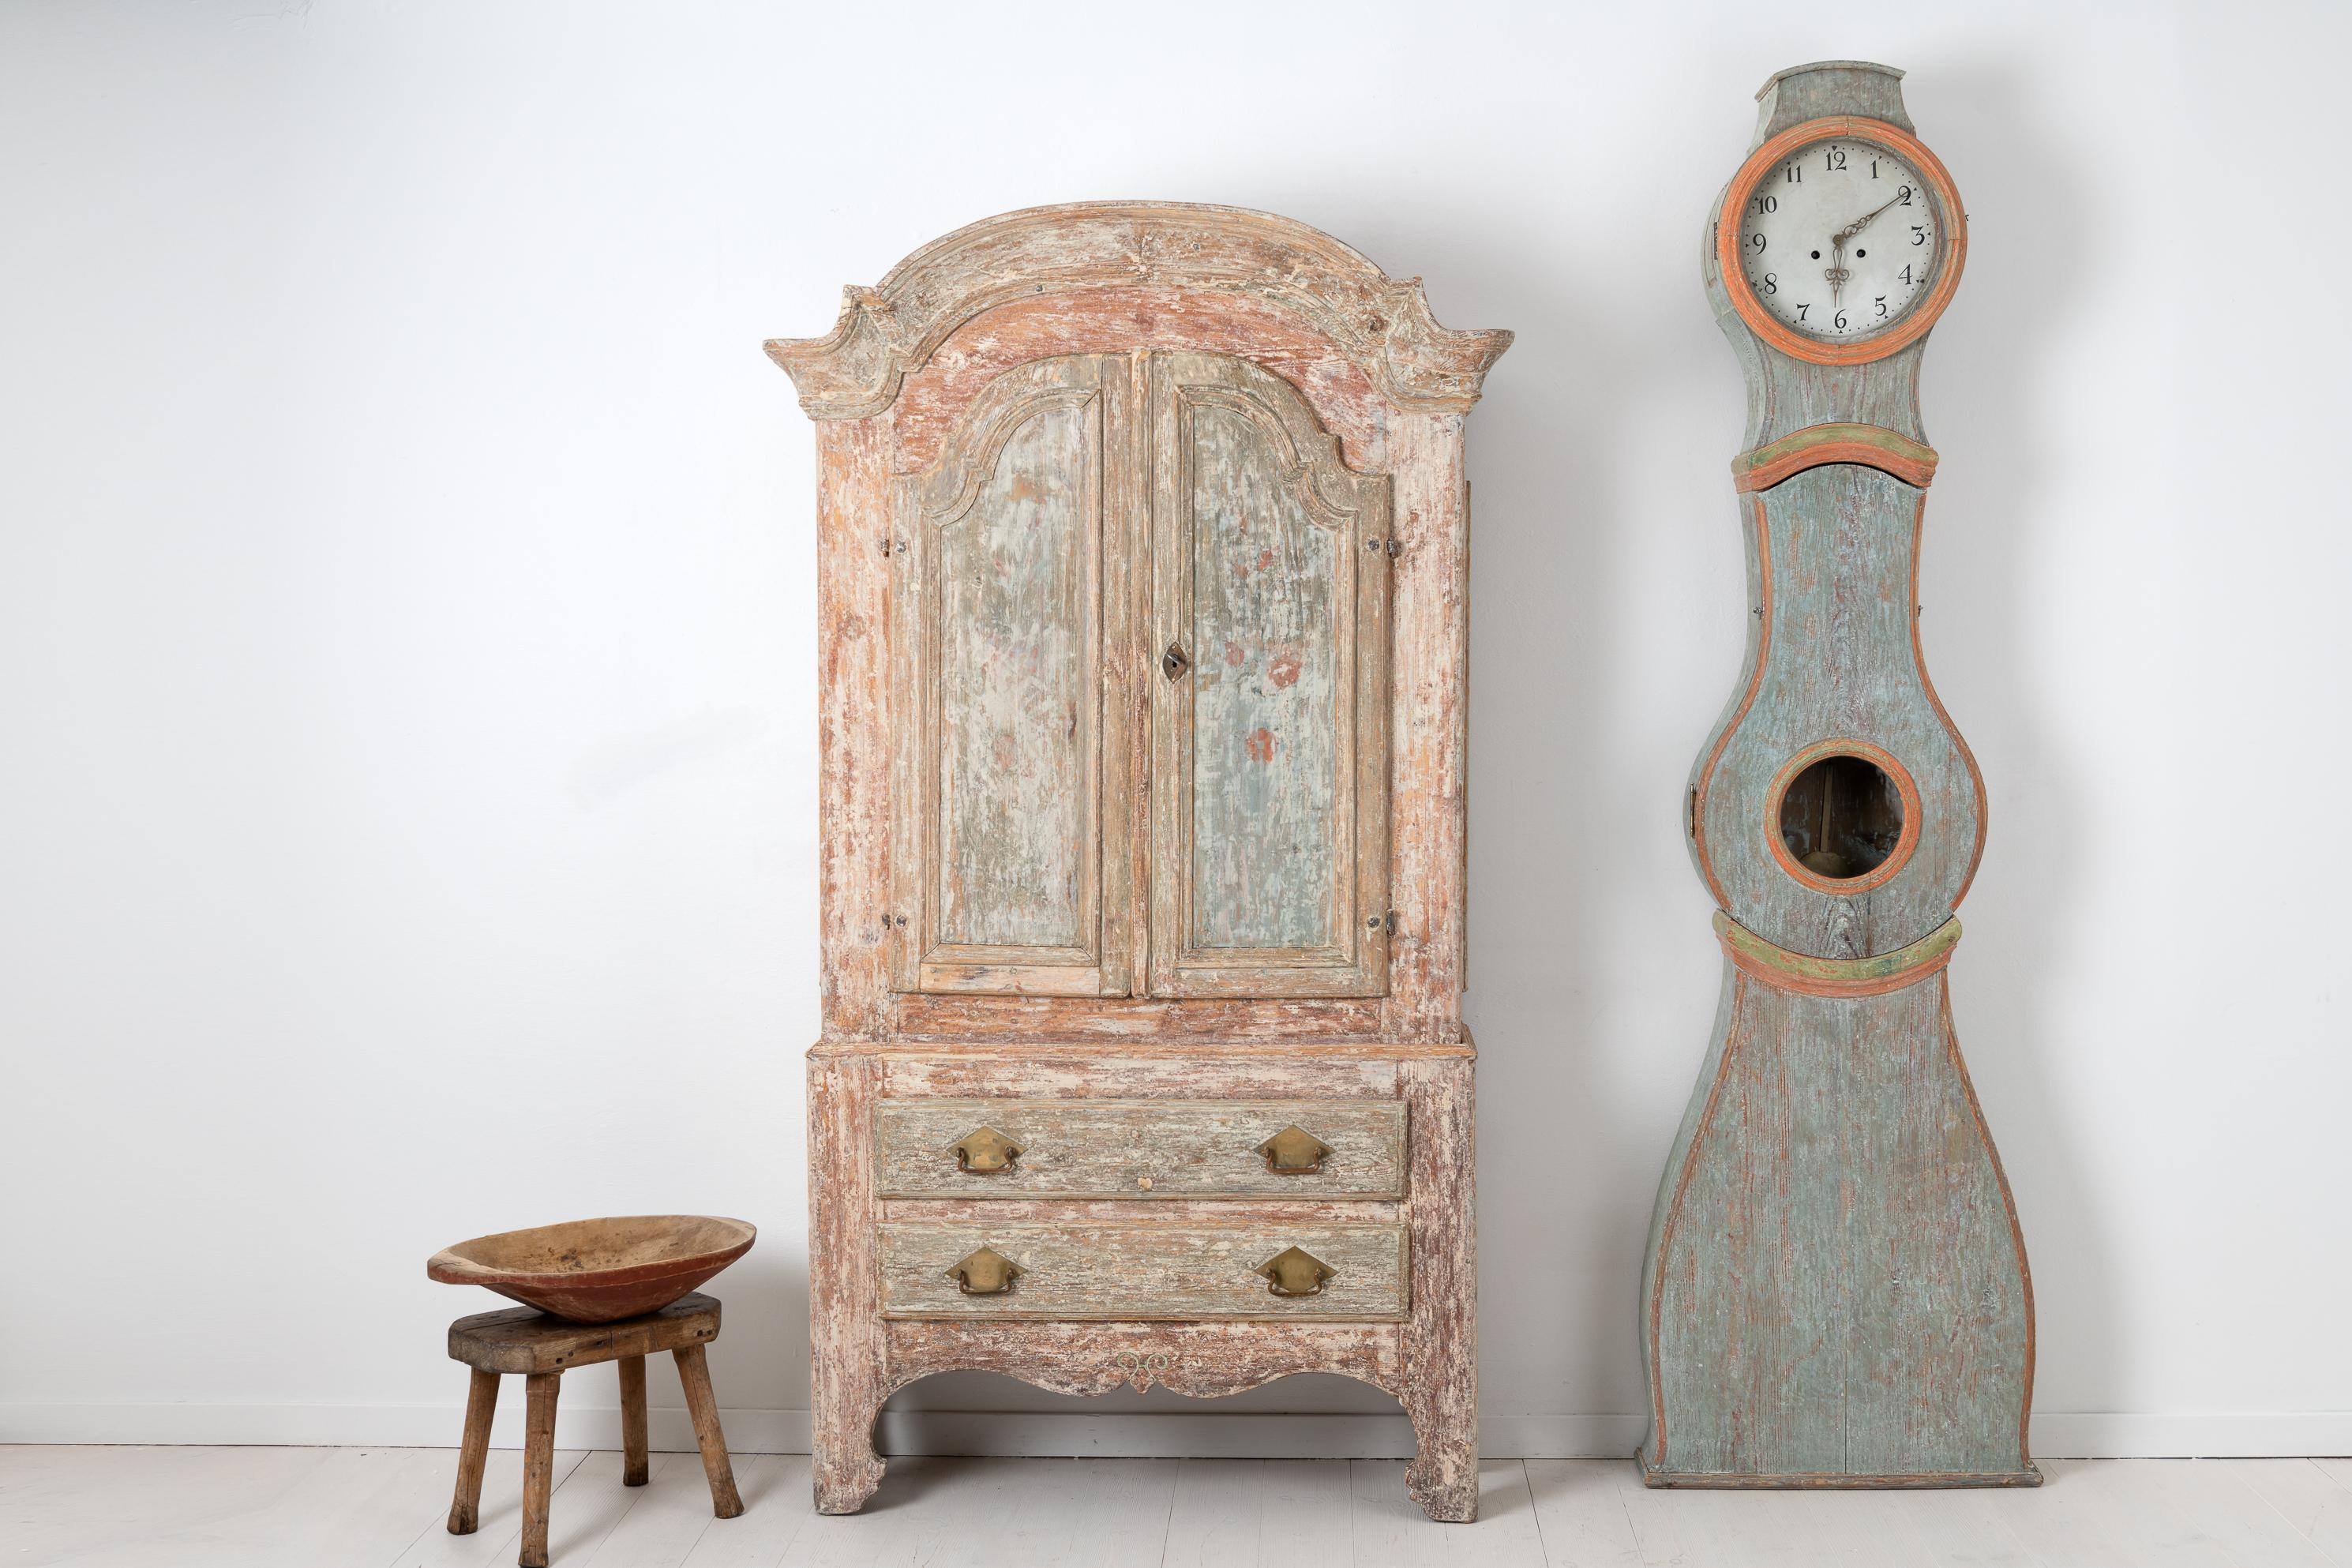 Swedish late 18th century rococo cabinet from the Swedish province Jämtland. The cabinet is a typical Swedish country furniture with clean design and skillful craftsmanship solidified in functionality and quality. Made in Swedish pine with traces of